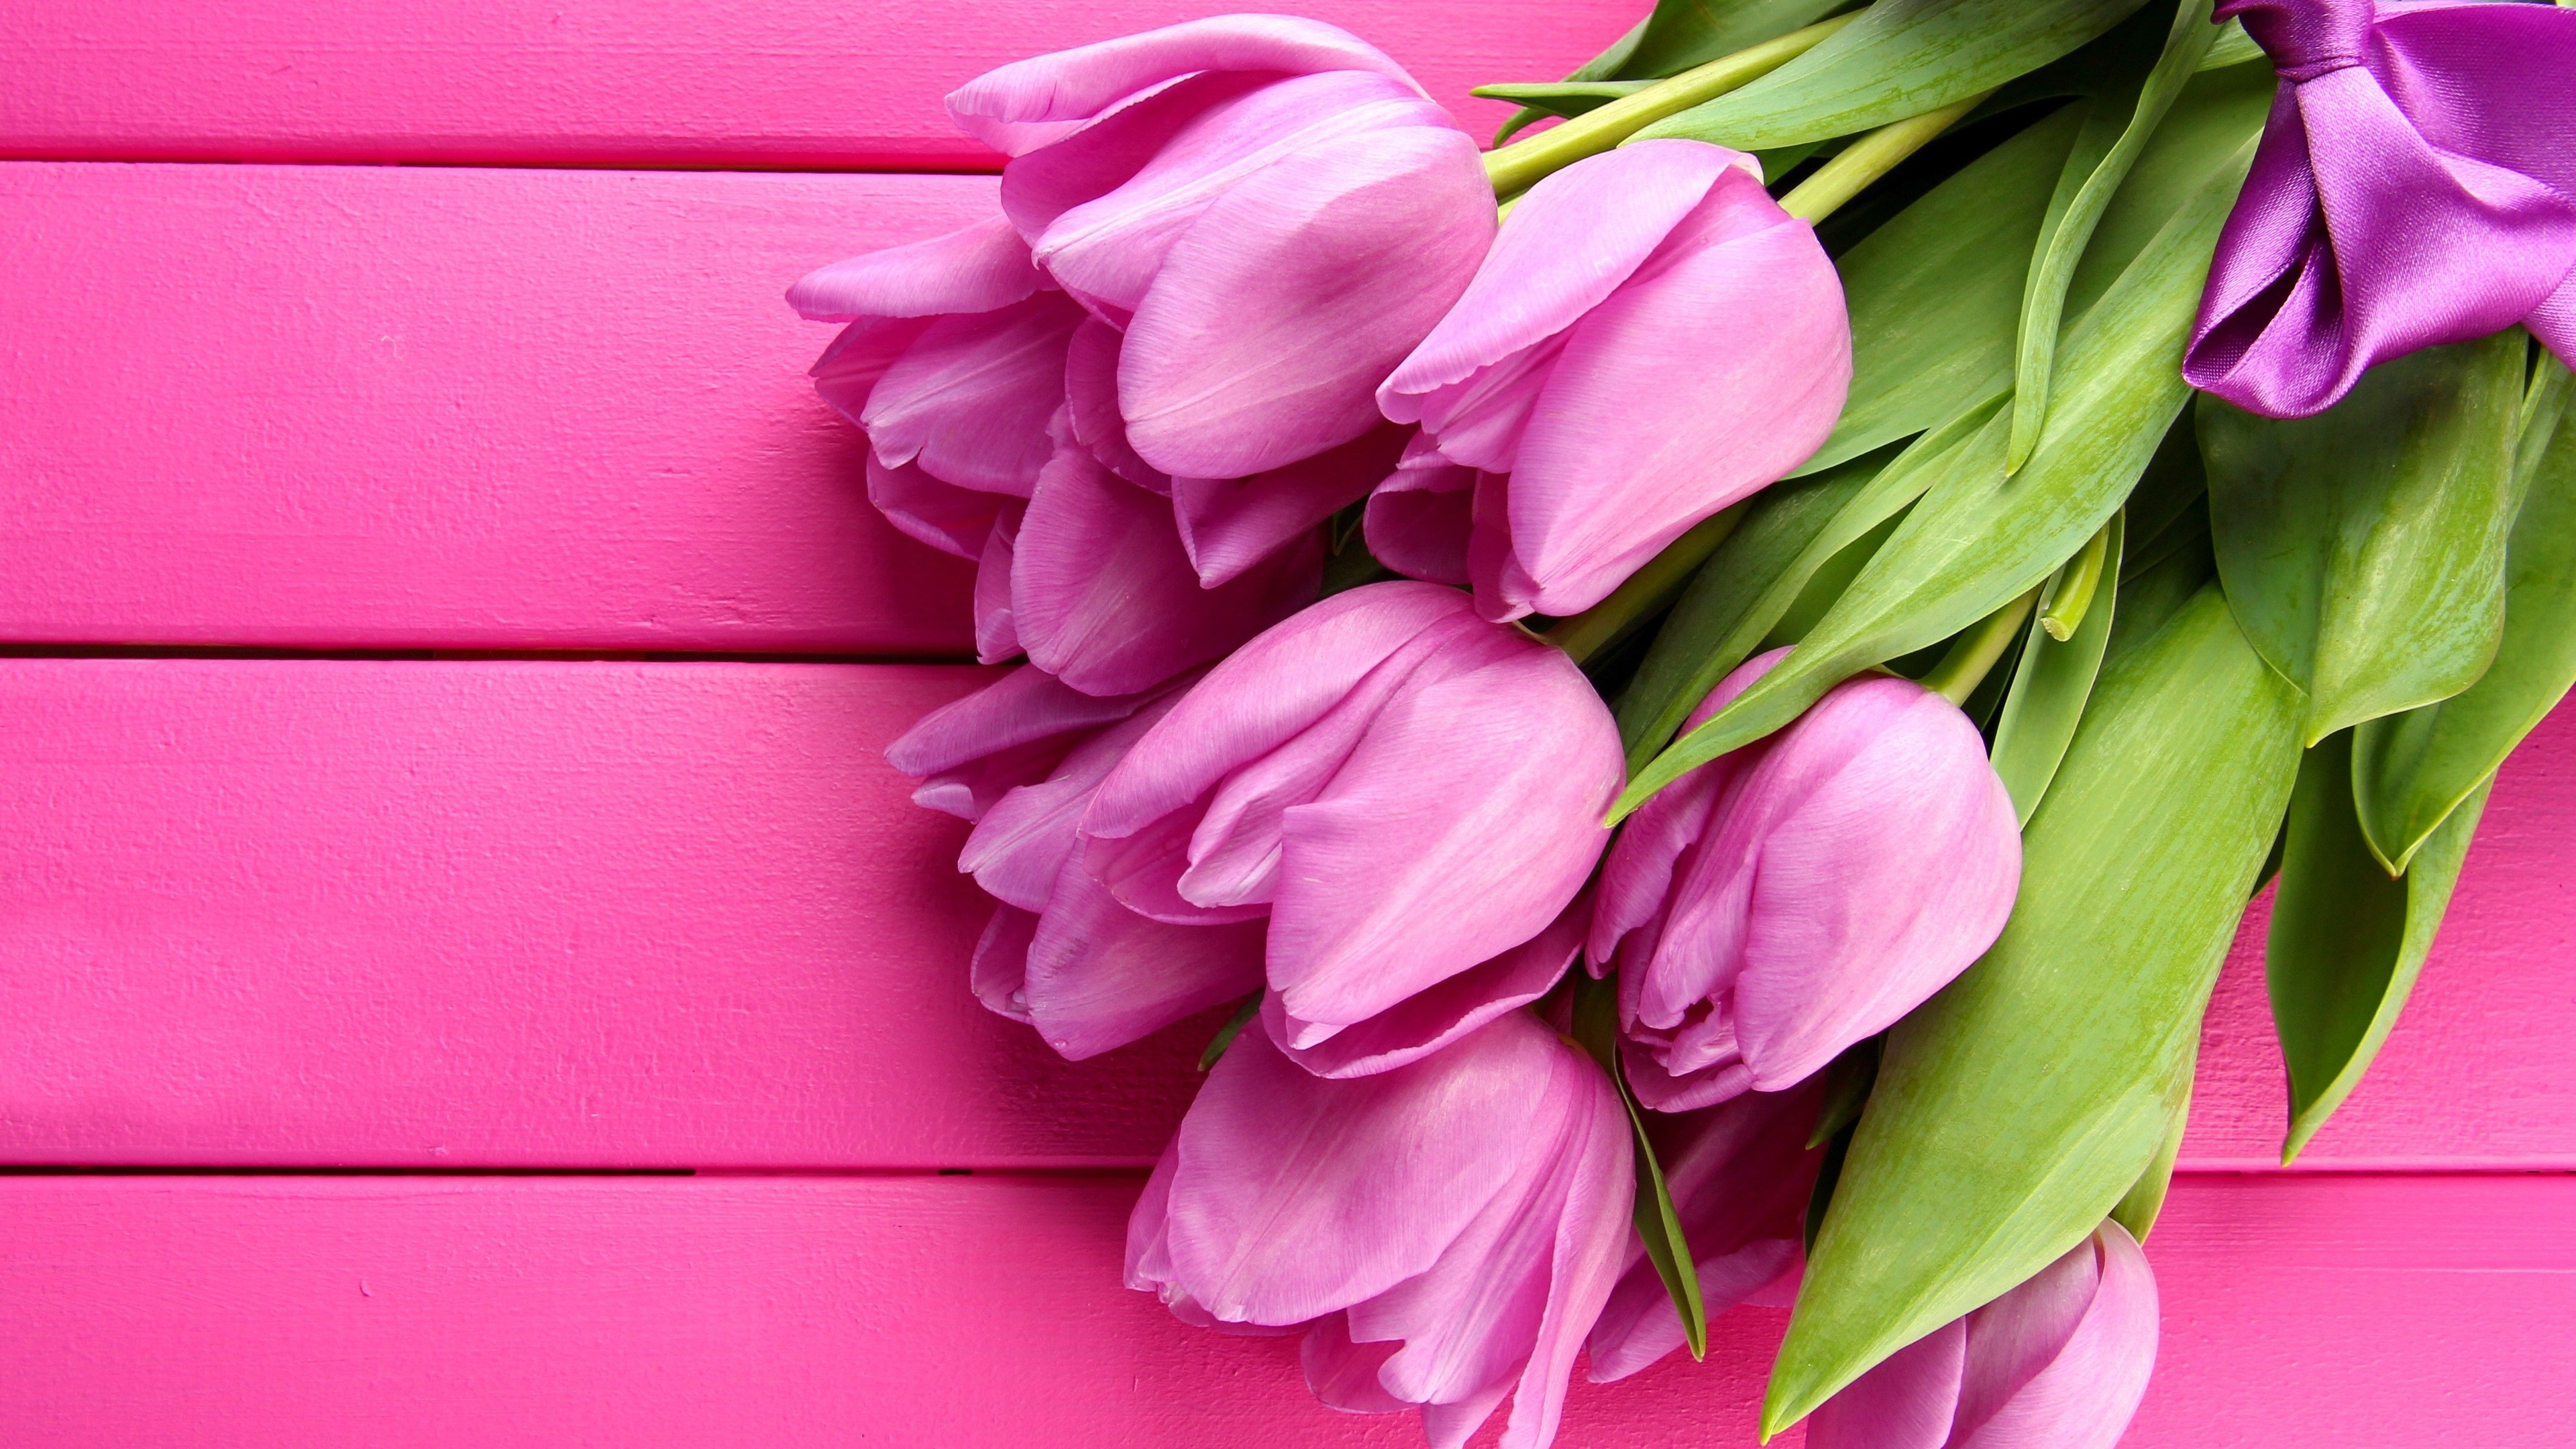 Gorgeous Pink Tulips for 3840 x 2160 Ultra HD resolution